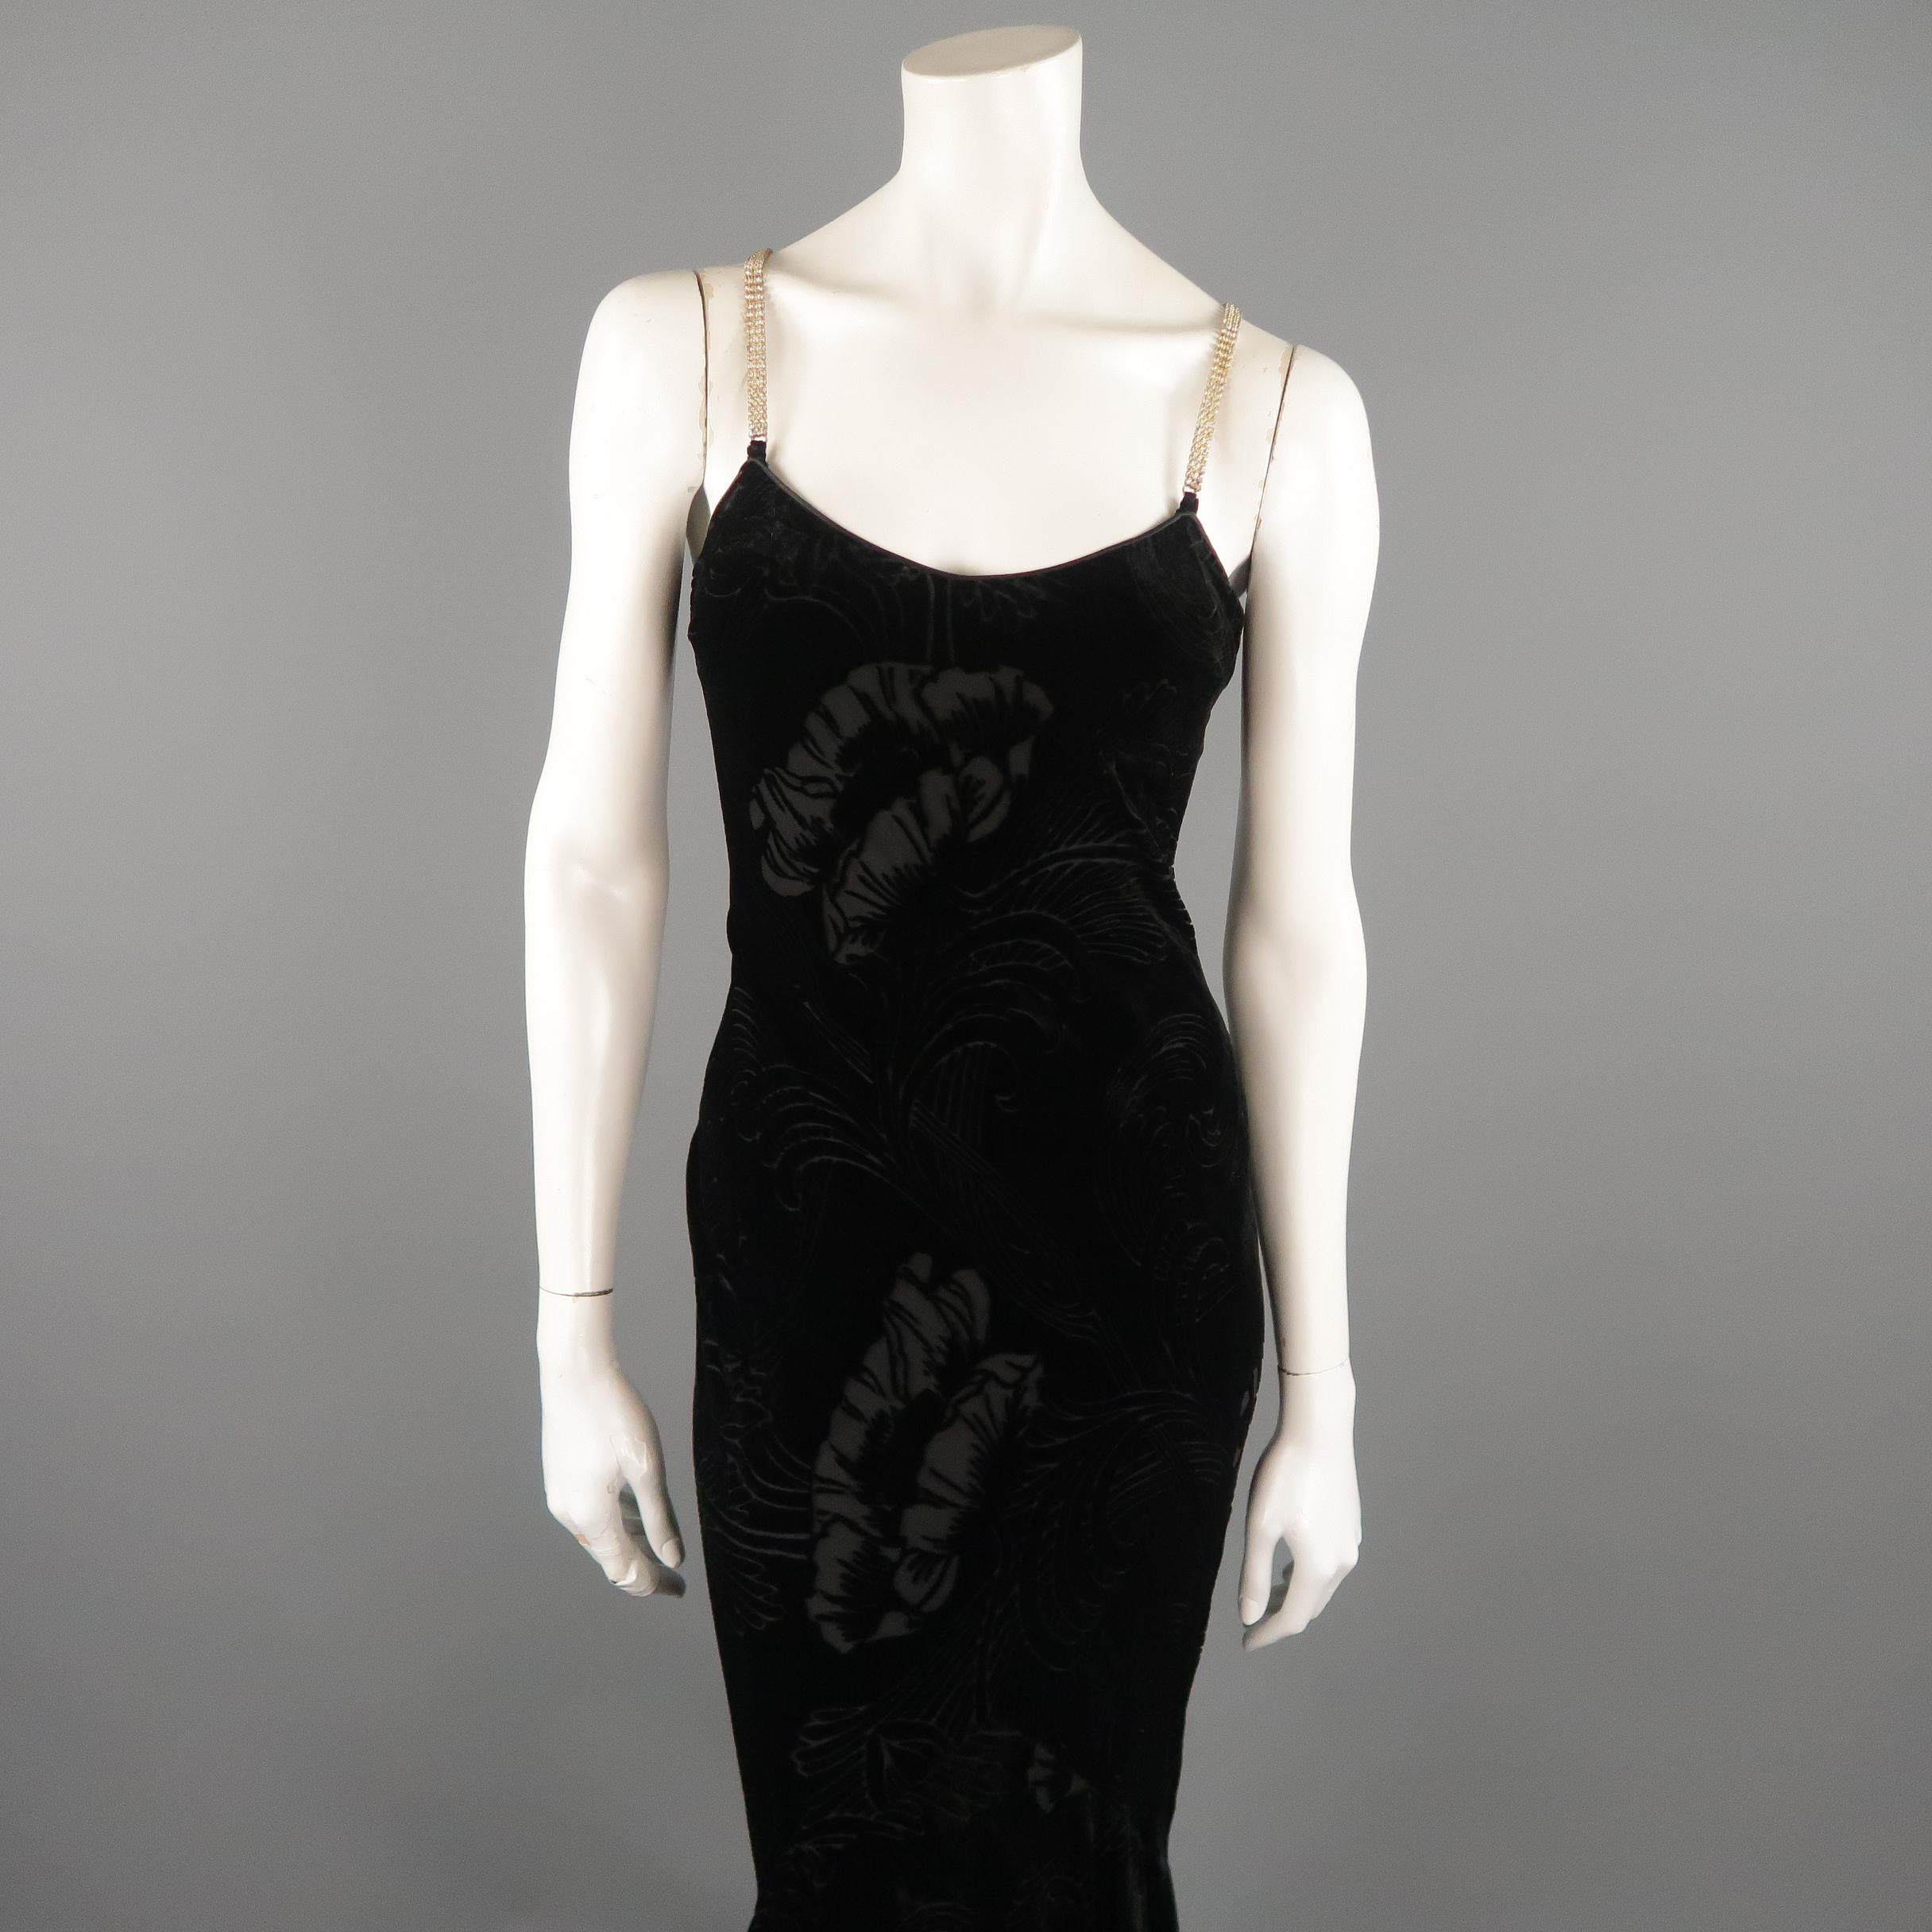 Archive JOHN GALLIANO gown comes in black floral print burnout velvet with a strapless V neck, clear silver rhinestone straps, and fitted silhouette with flaired train. Missing one rhinestone shown in detail shot. Made in France.
 
Very Good